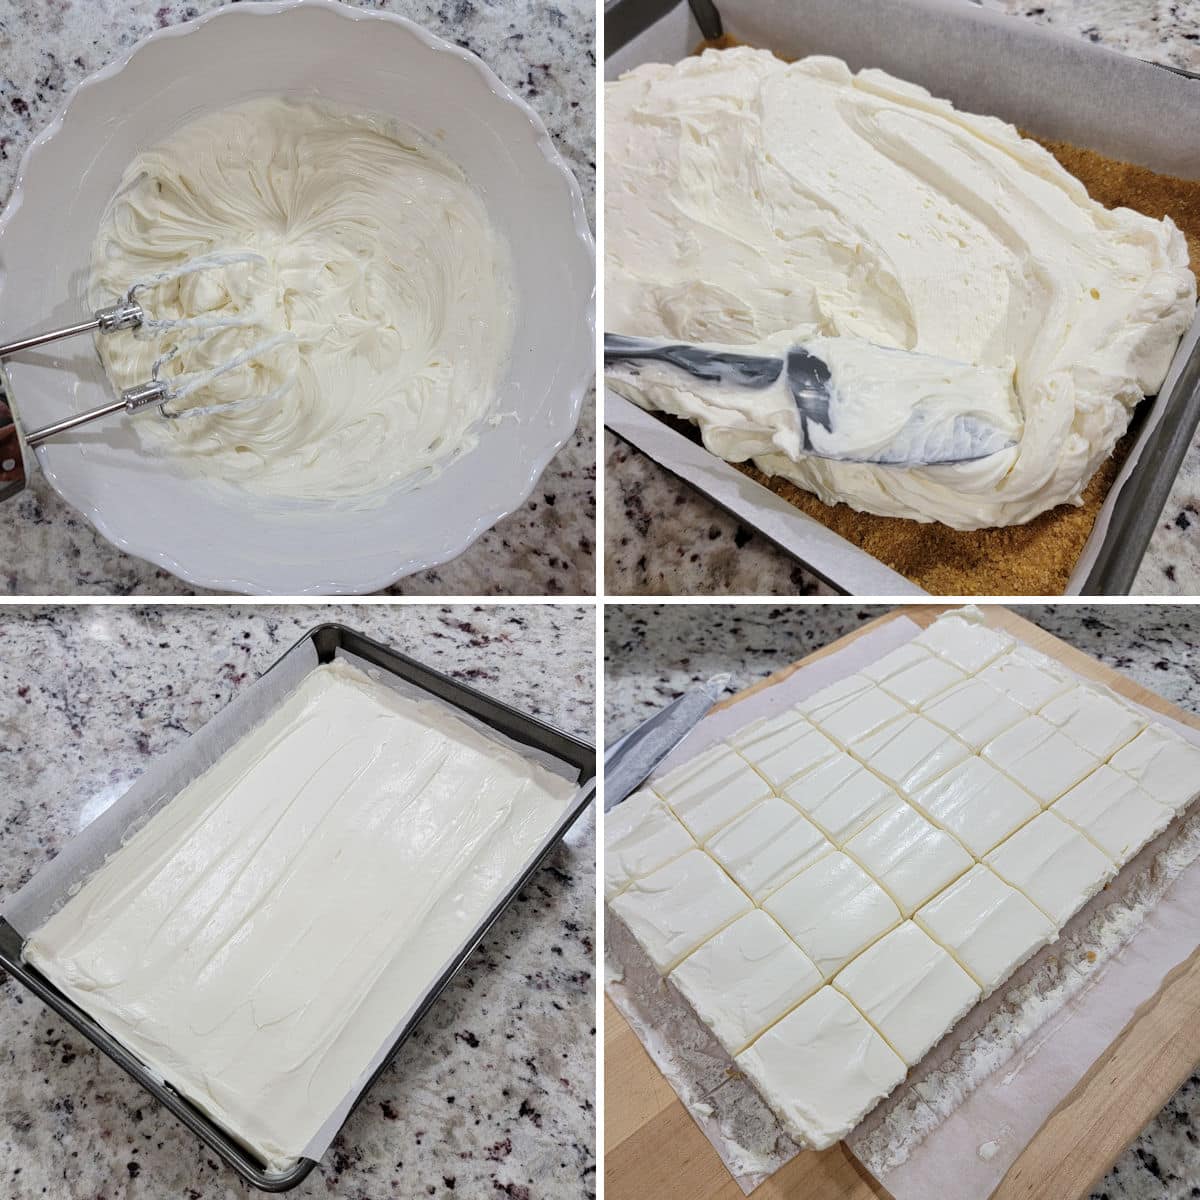 Making no bake cheesecake filling, spreading into a pan, then slicing into bars.